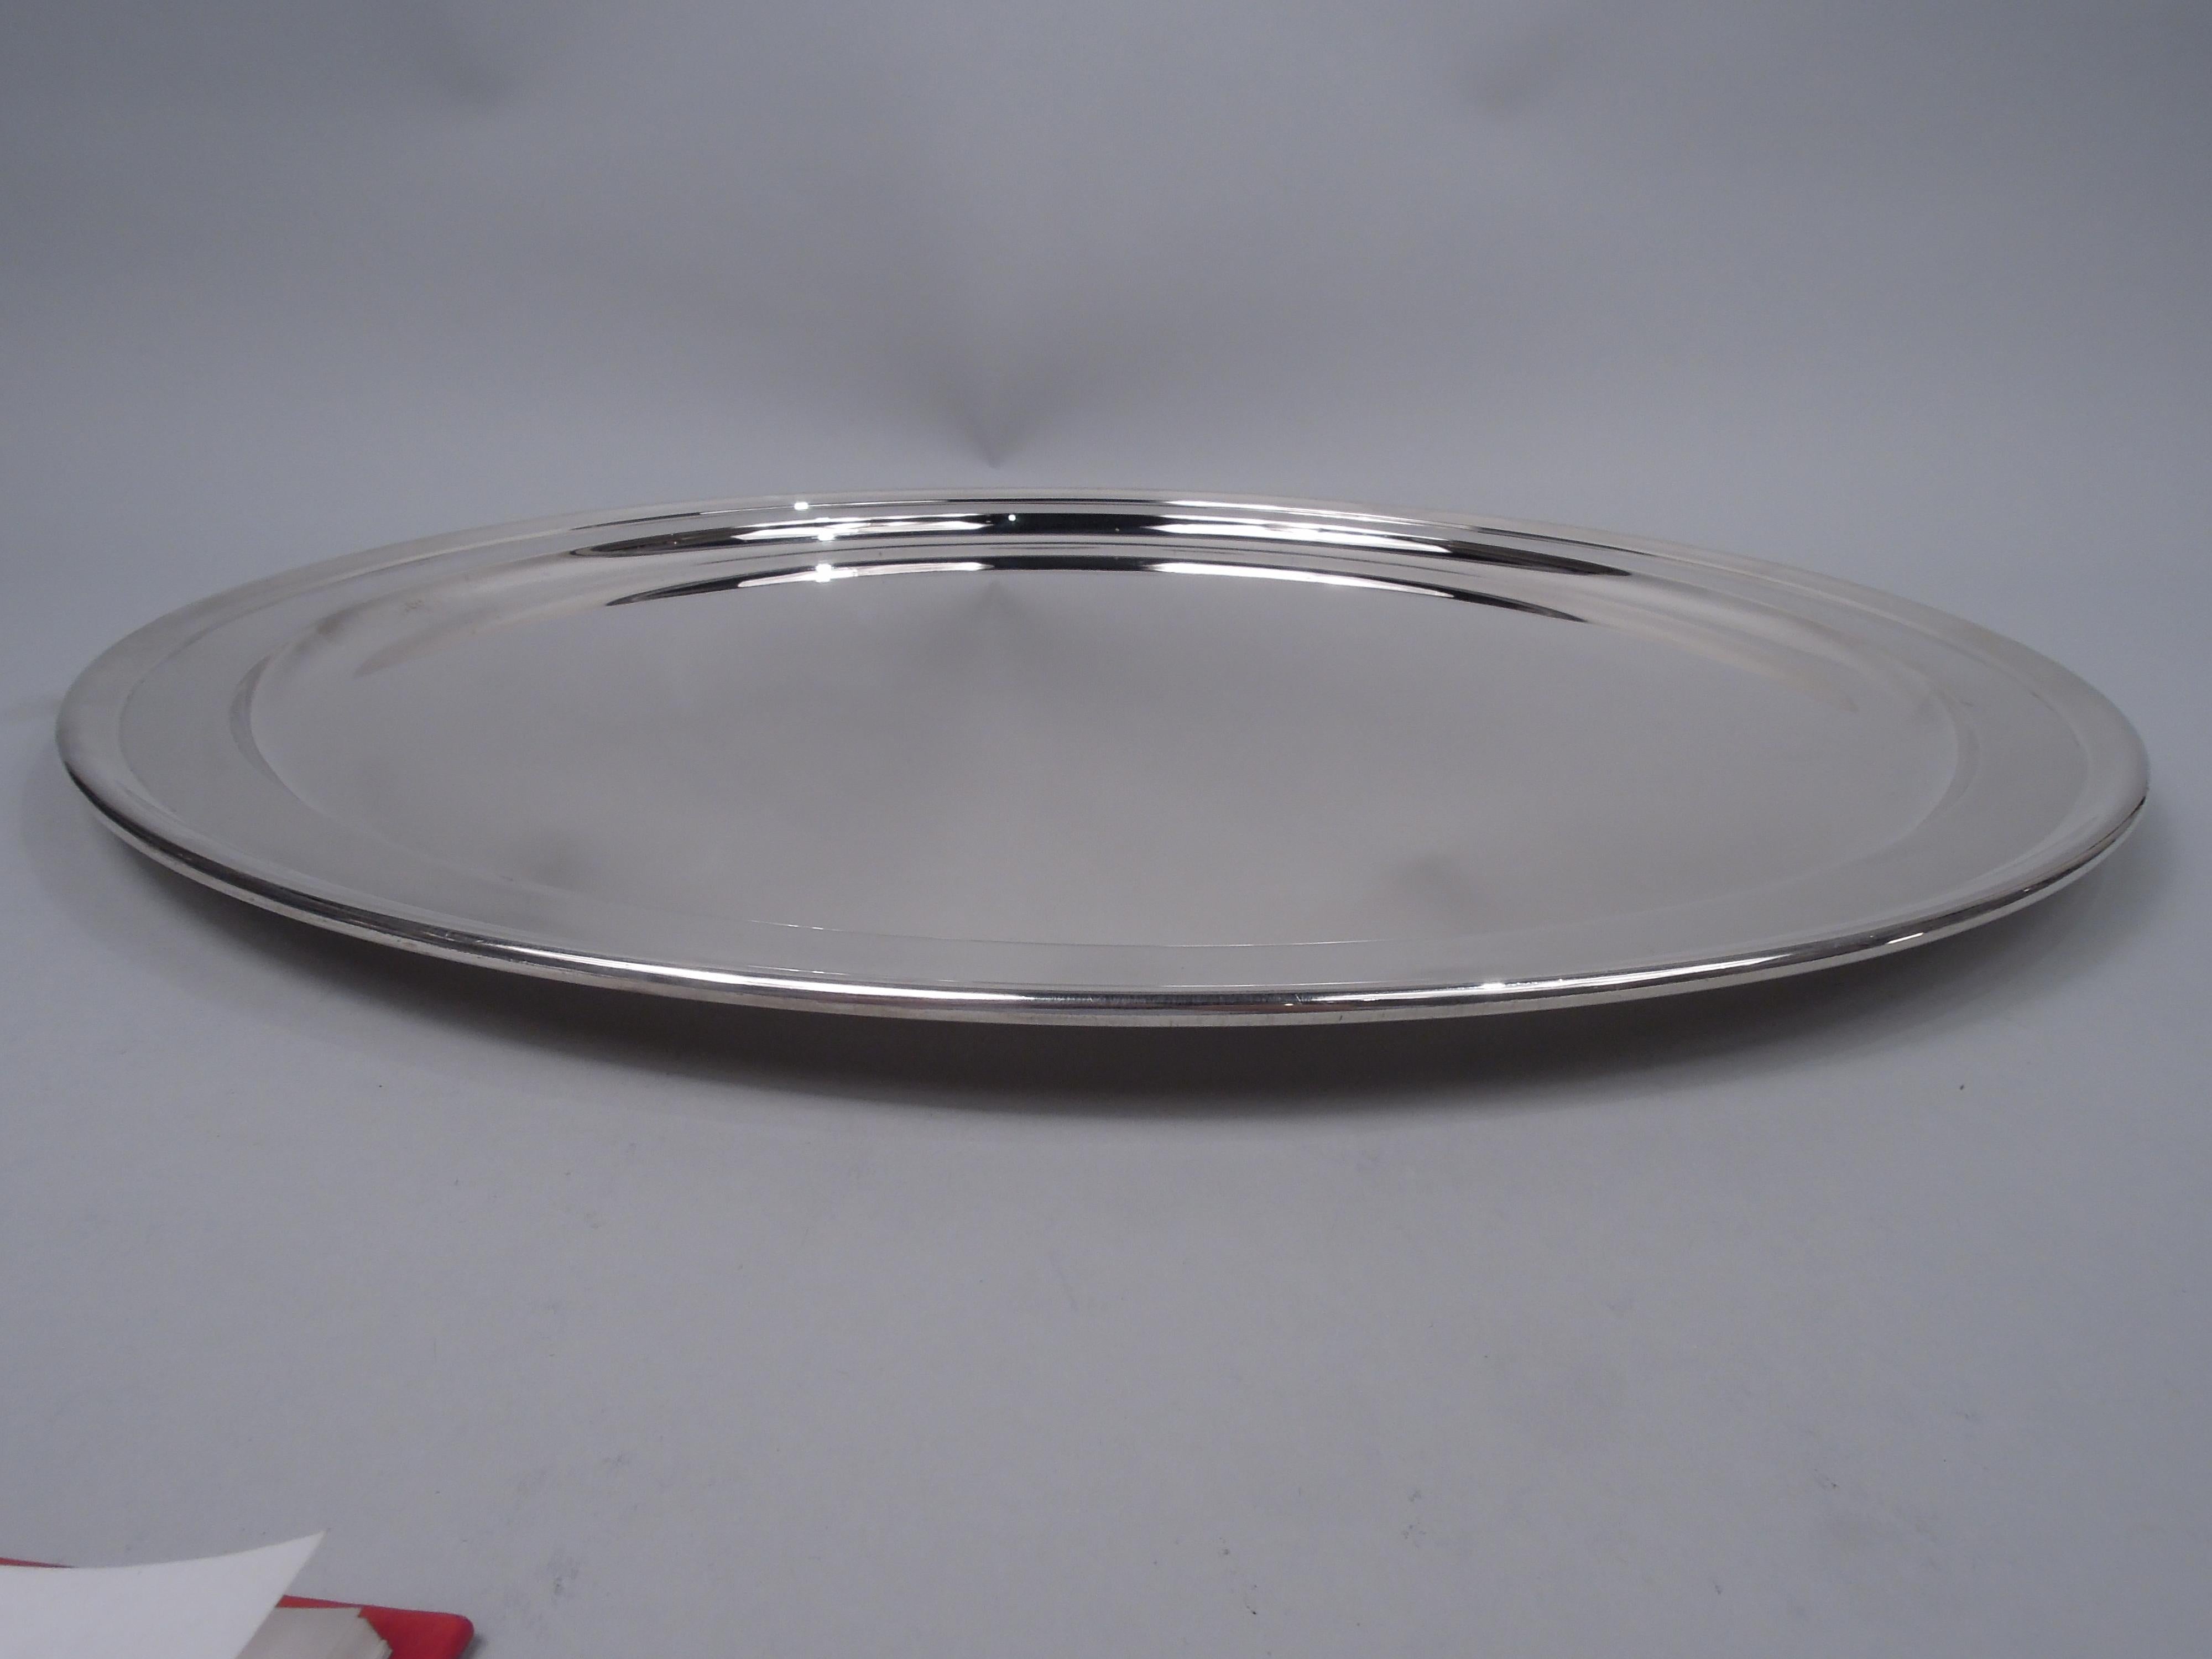 Large Midcentury Modern sterling silver tray. Made by Tiffany & Co. in New York. Round well with narrow shoulder and folded-over rim. Super functional with nice heft and balance. Fully marked including maker’s stamp, postwar pattern no. 23427, and